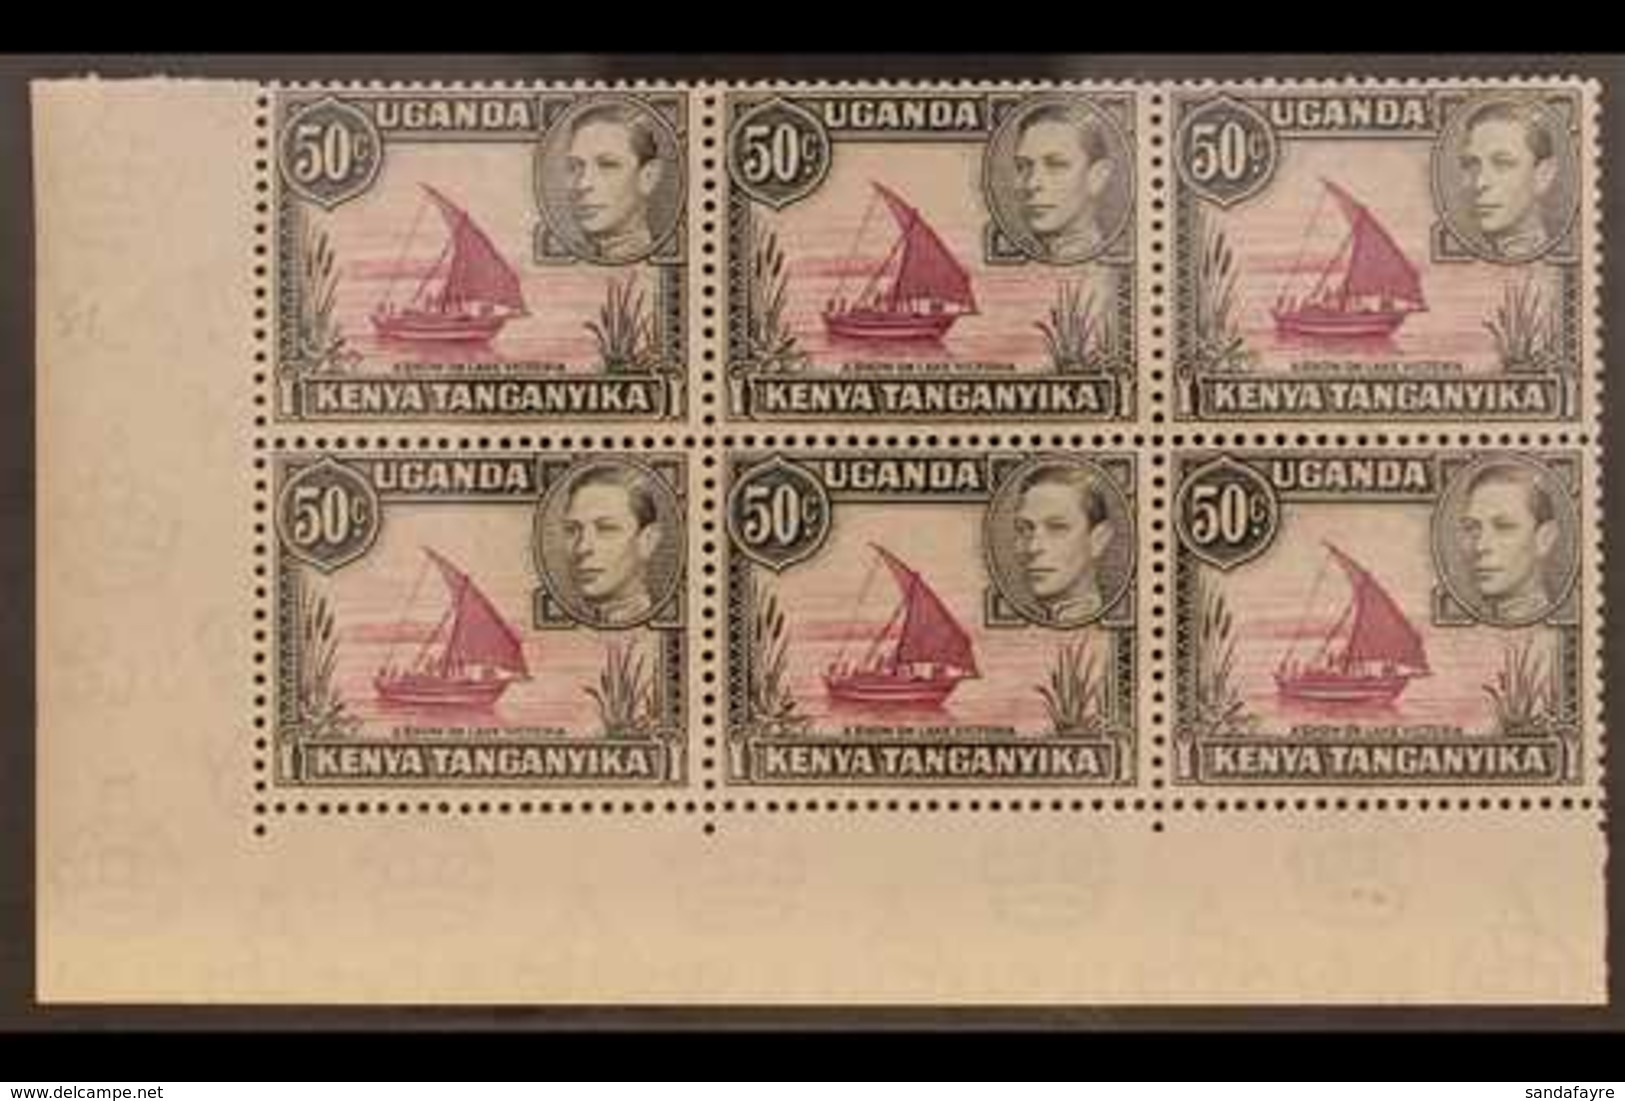 1938-54 50c Reddish Purple & Black, Corner Marginal Block Of Six (R9/1-3 & R10/1-3) With DOT REMOVED, In Pair With Norma - Vide